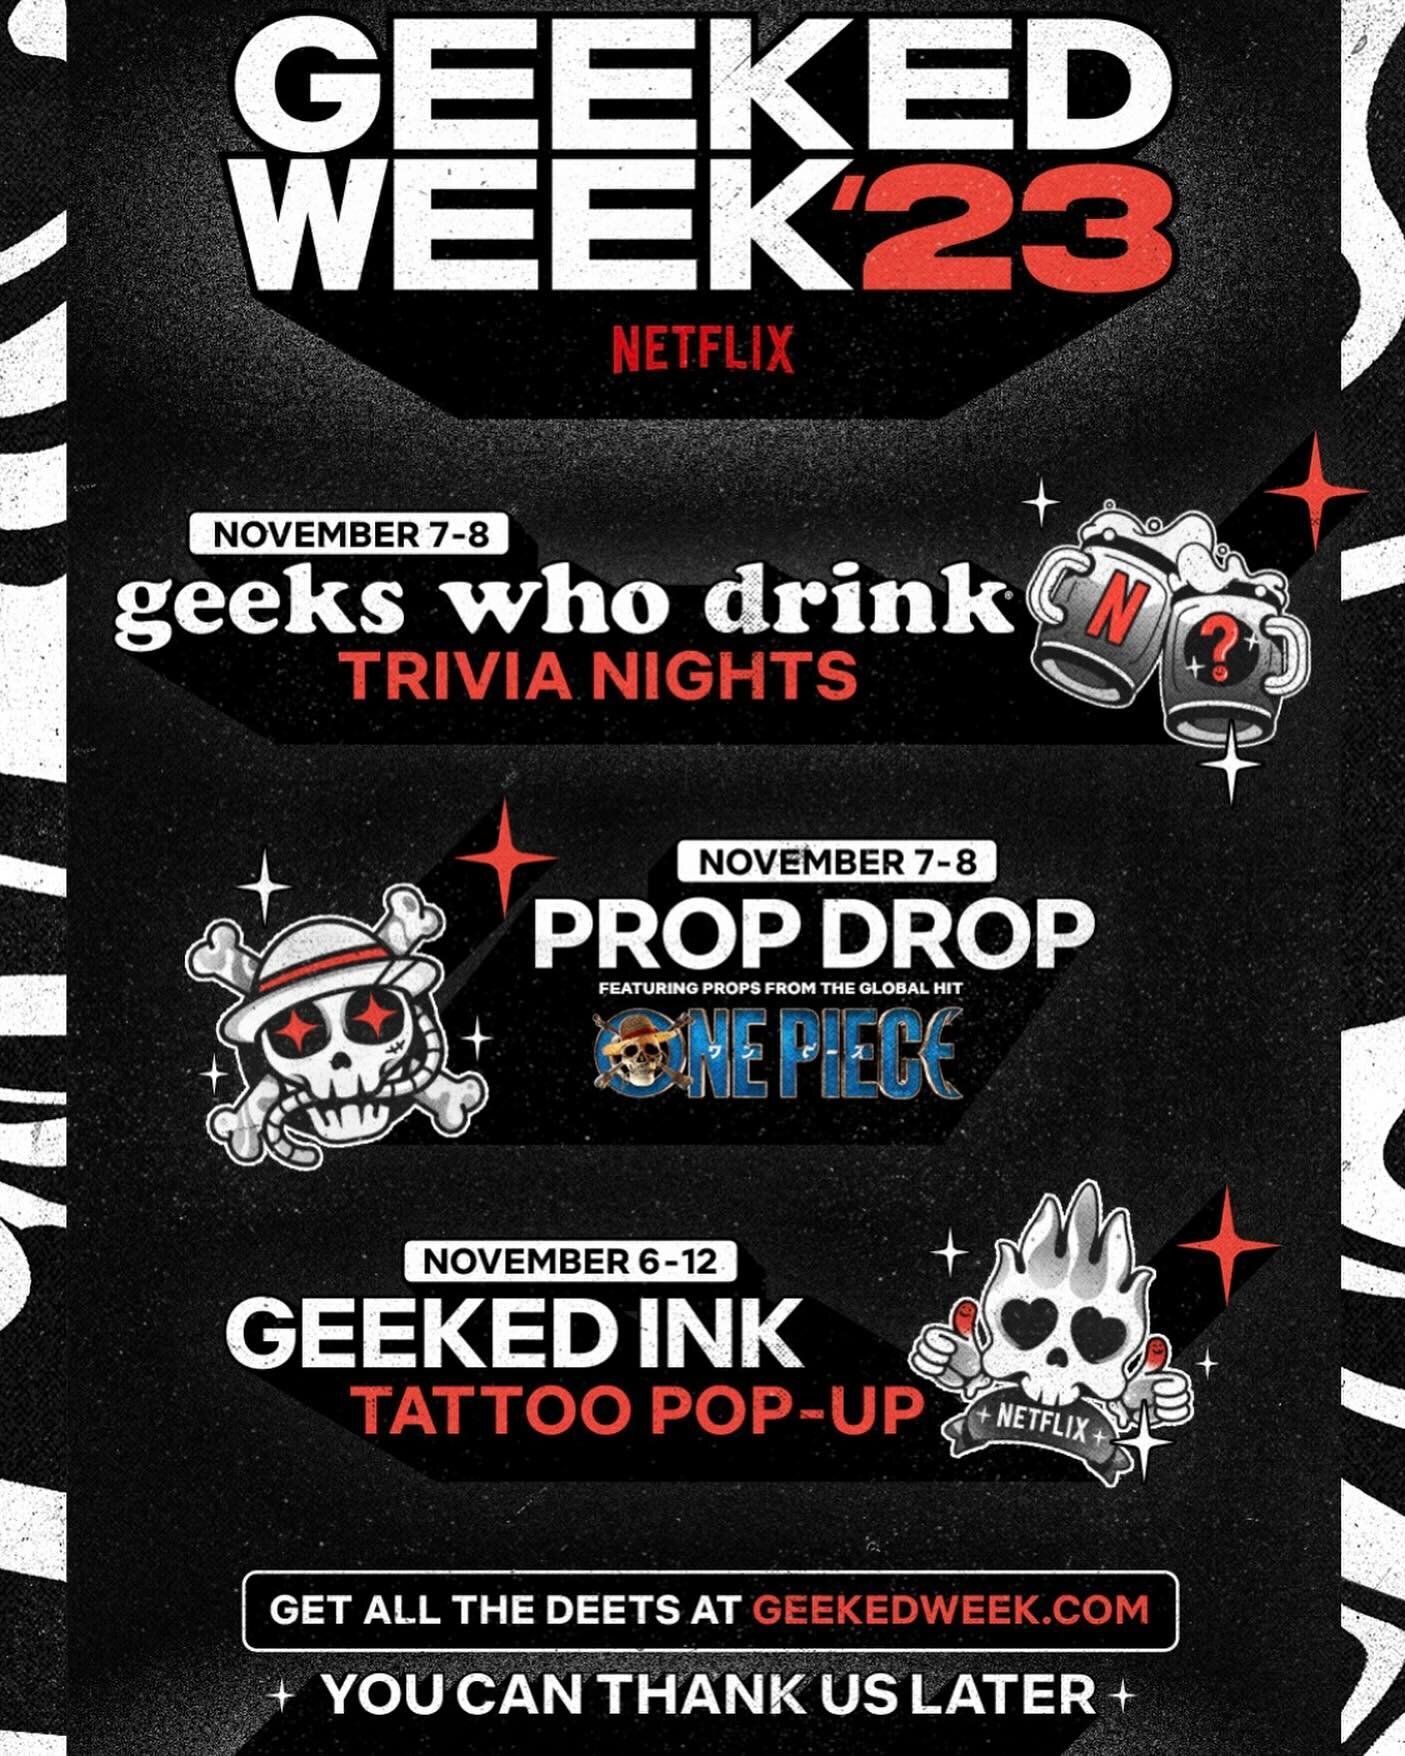 Happy to announce FLYRITE TATTOO will be participating with NETFLIX in GEEKED WEEK&rsquo;23! 
Our dates will be Tuesday November 7,2023 and Wednesday November 8,2023 from 1pm-9pm!
TATTOO designs from specific flash based on NETFLIX shows will be done